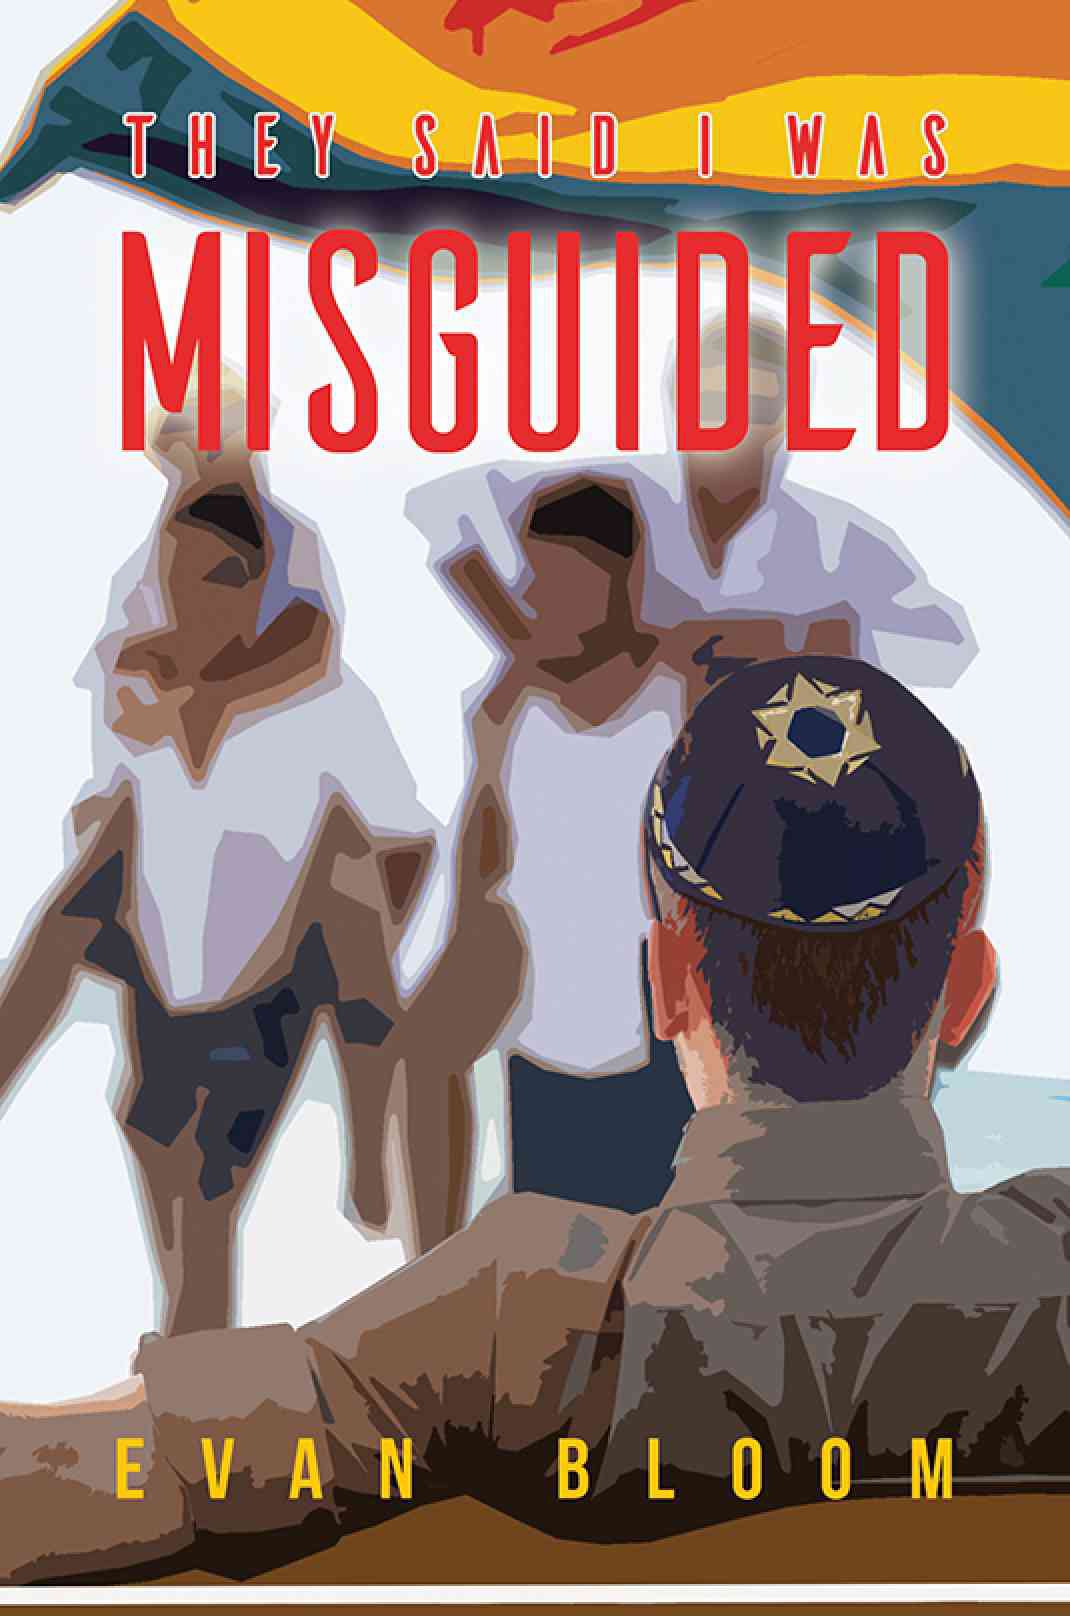 ‘They said I was Misguided’ receives brilliant 5 star reviews